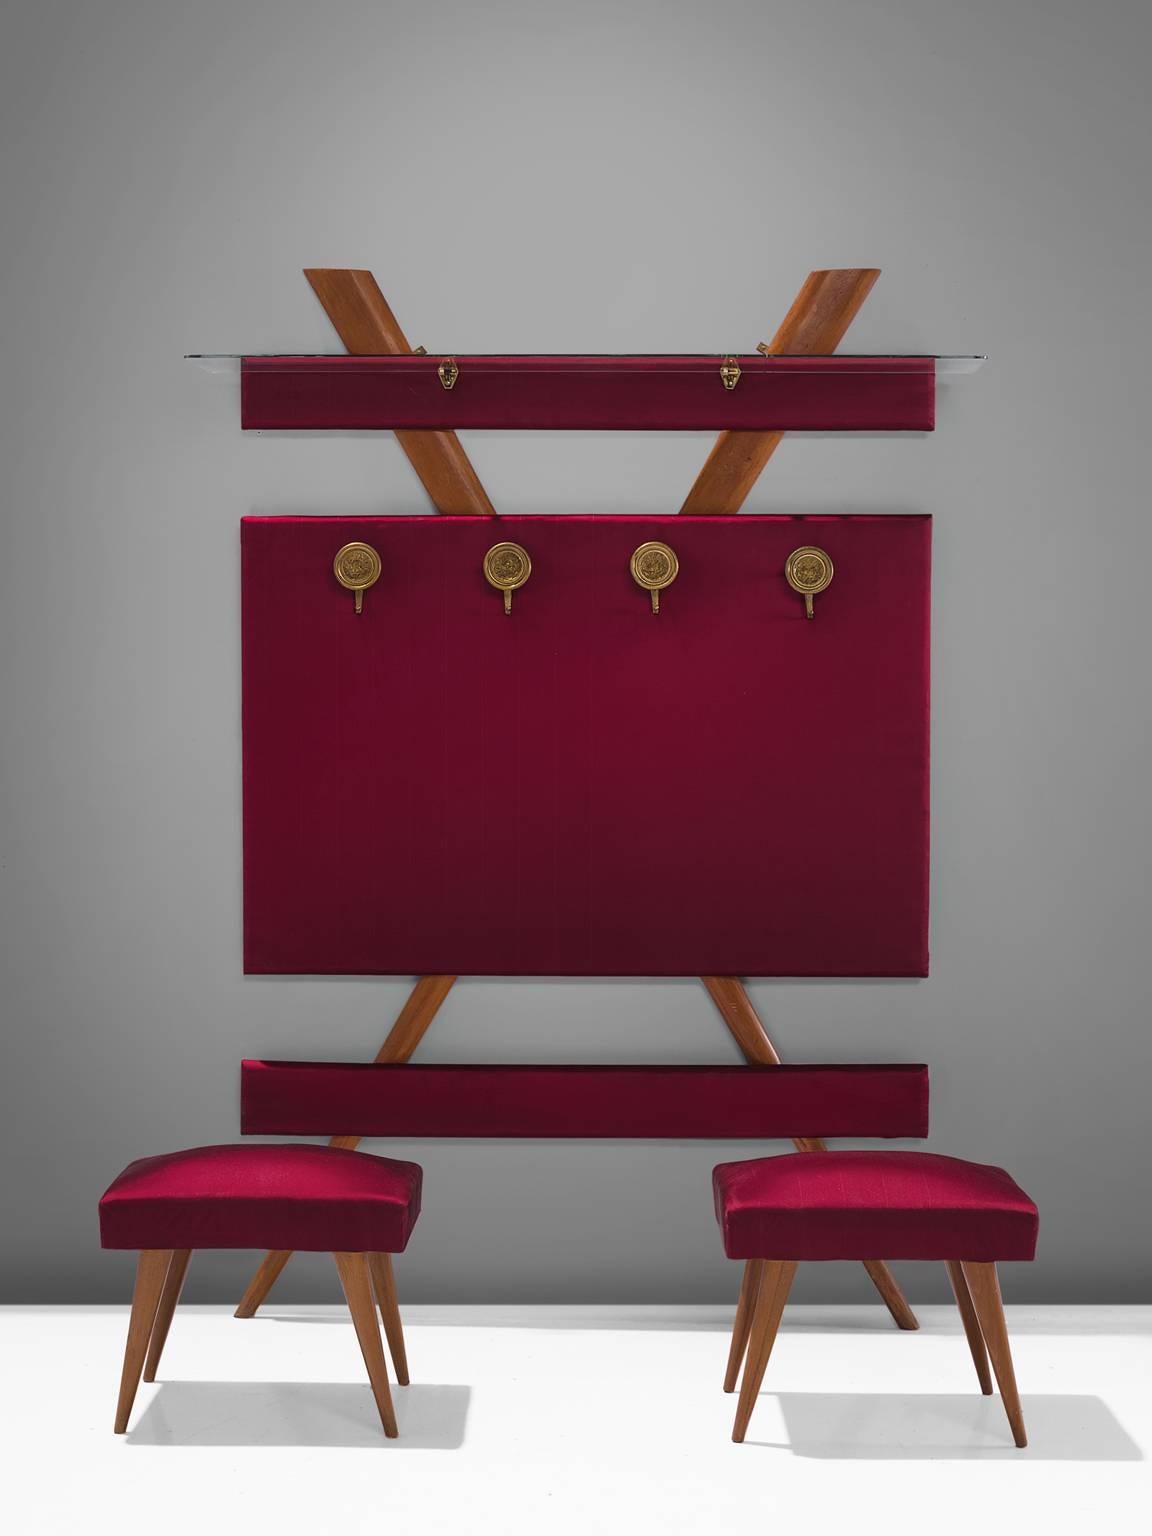 Vestibule set including stools and coat rack, wood and red fabric, Italy, 1950s

This elegant set is an ensemble of a coat rack, shelf a two stools. The set is executed in wood and features a playful, figurative aesthetic. The coat rack has a